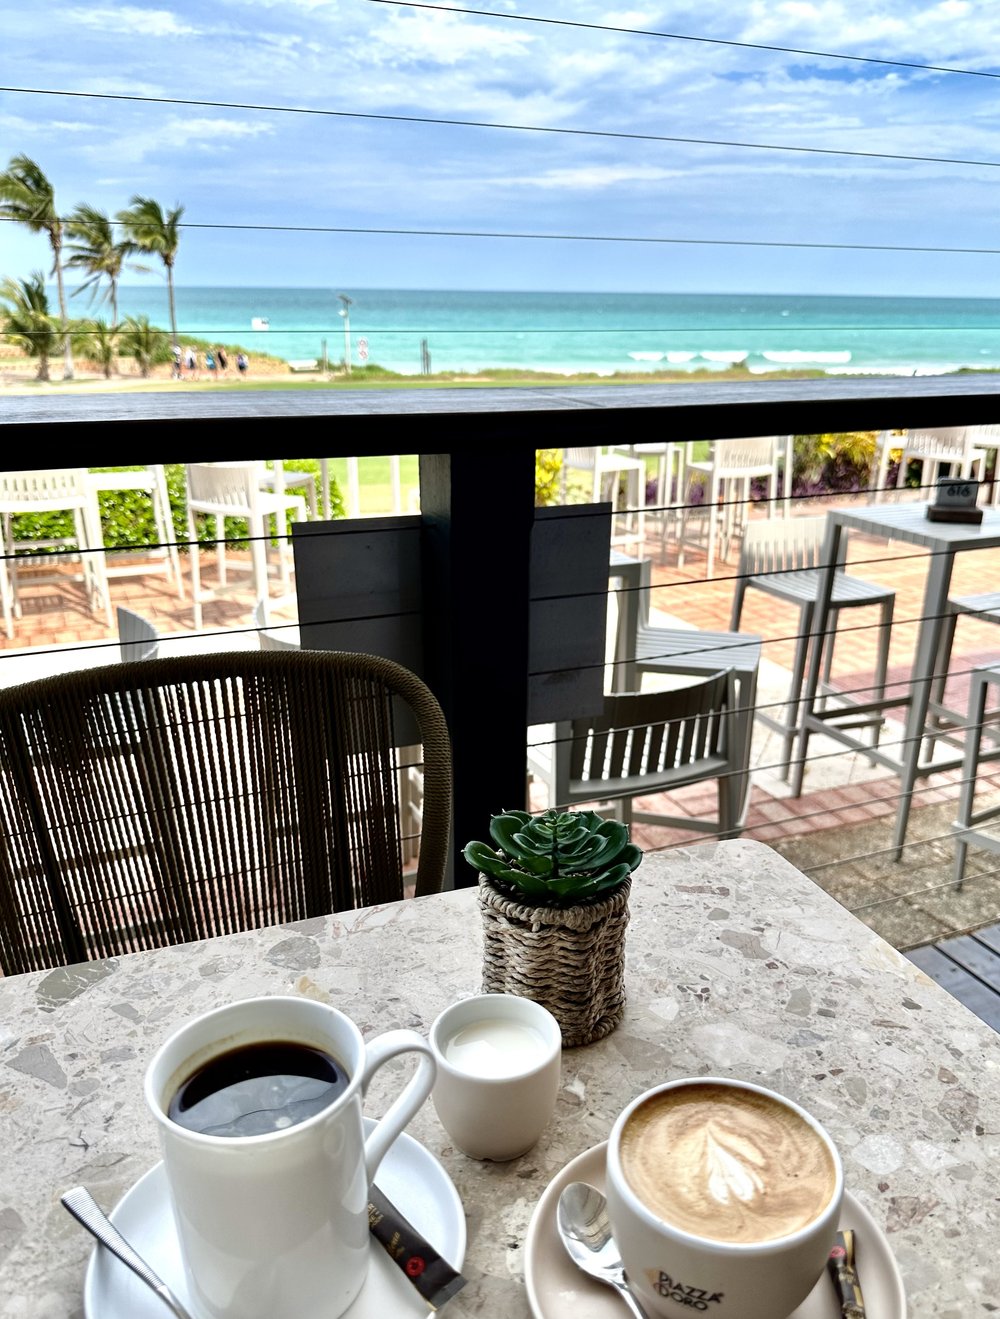 Coffee with a view....